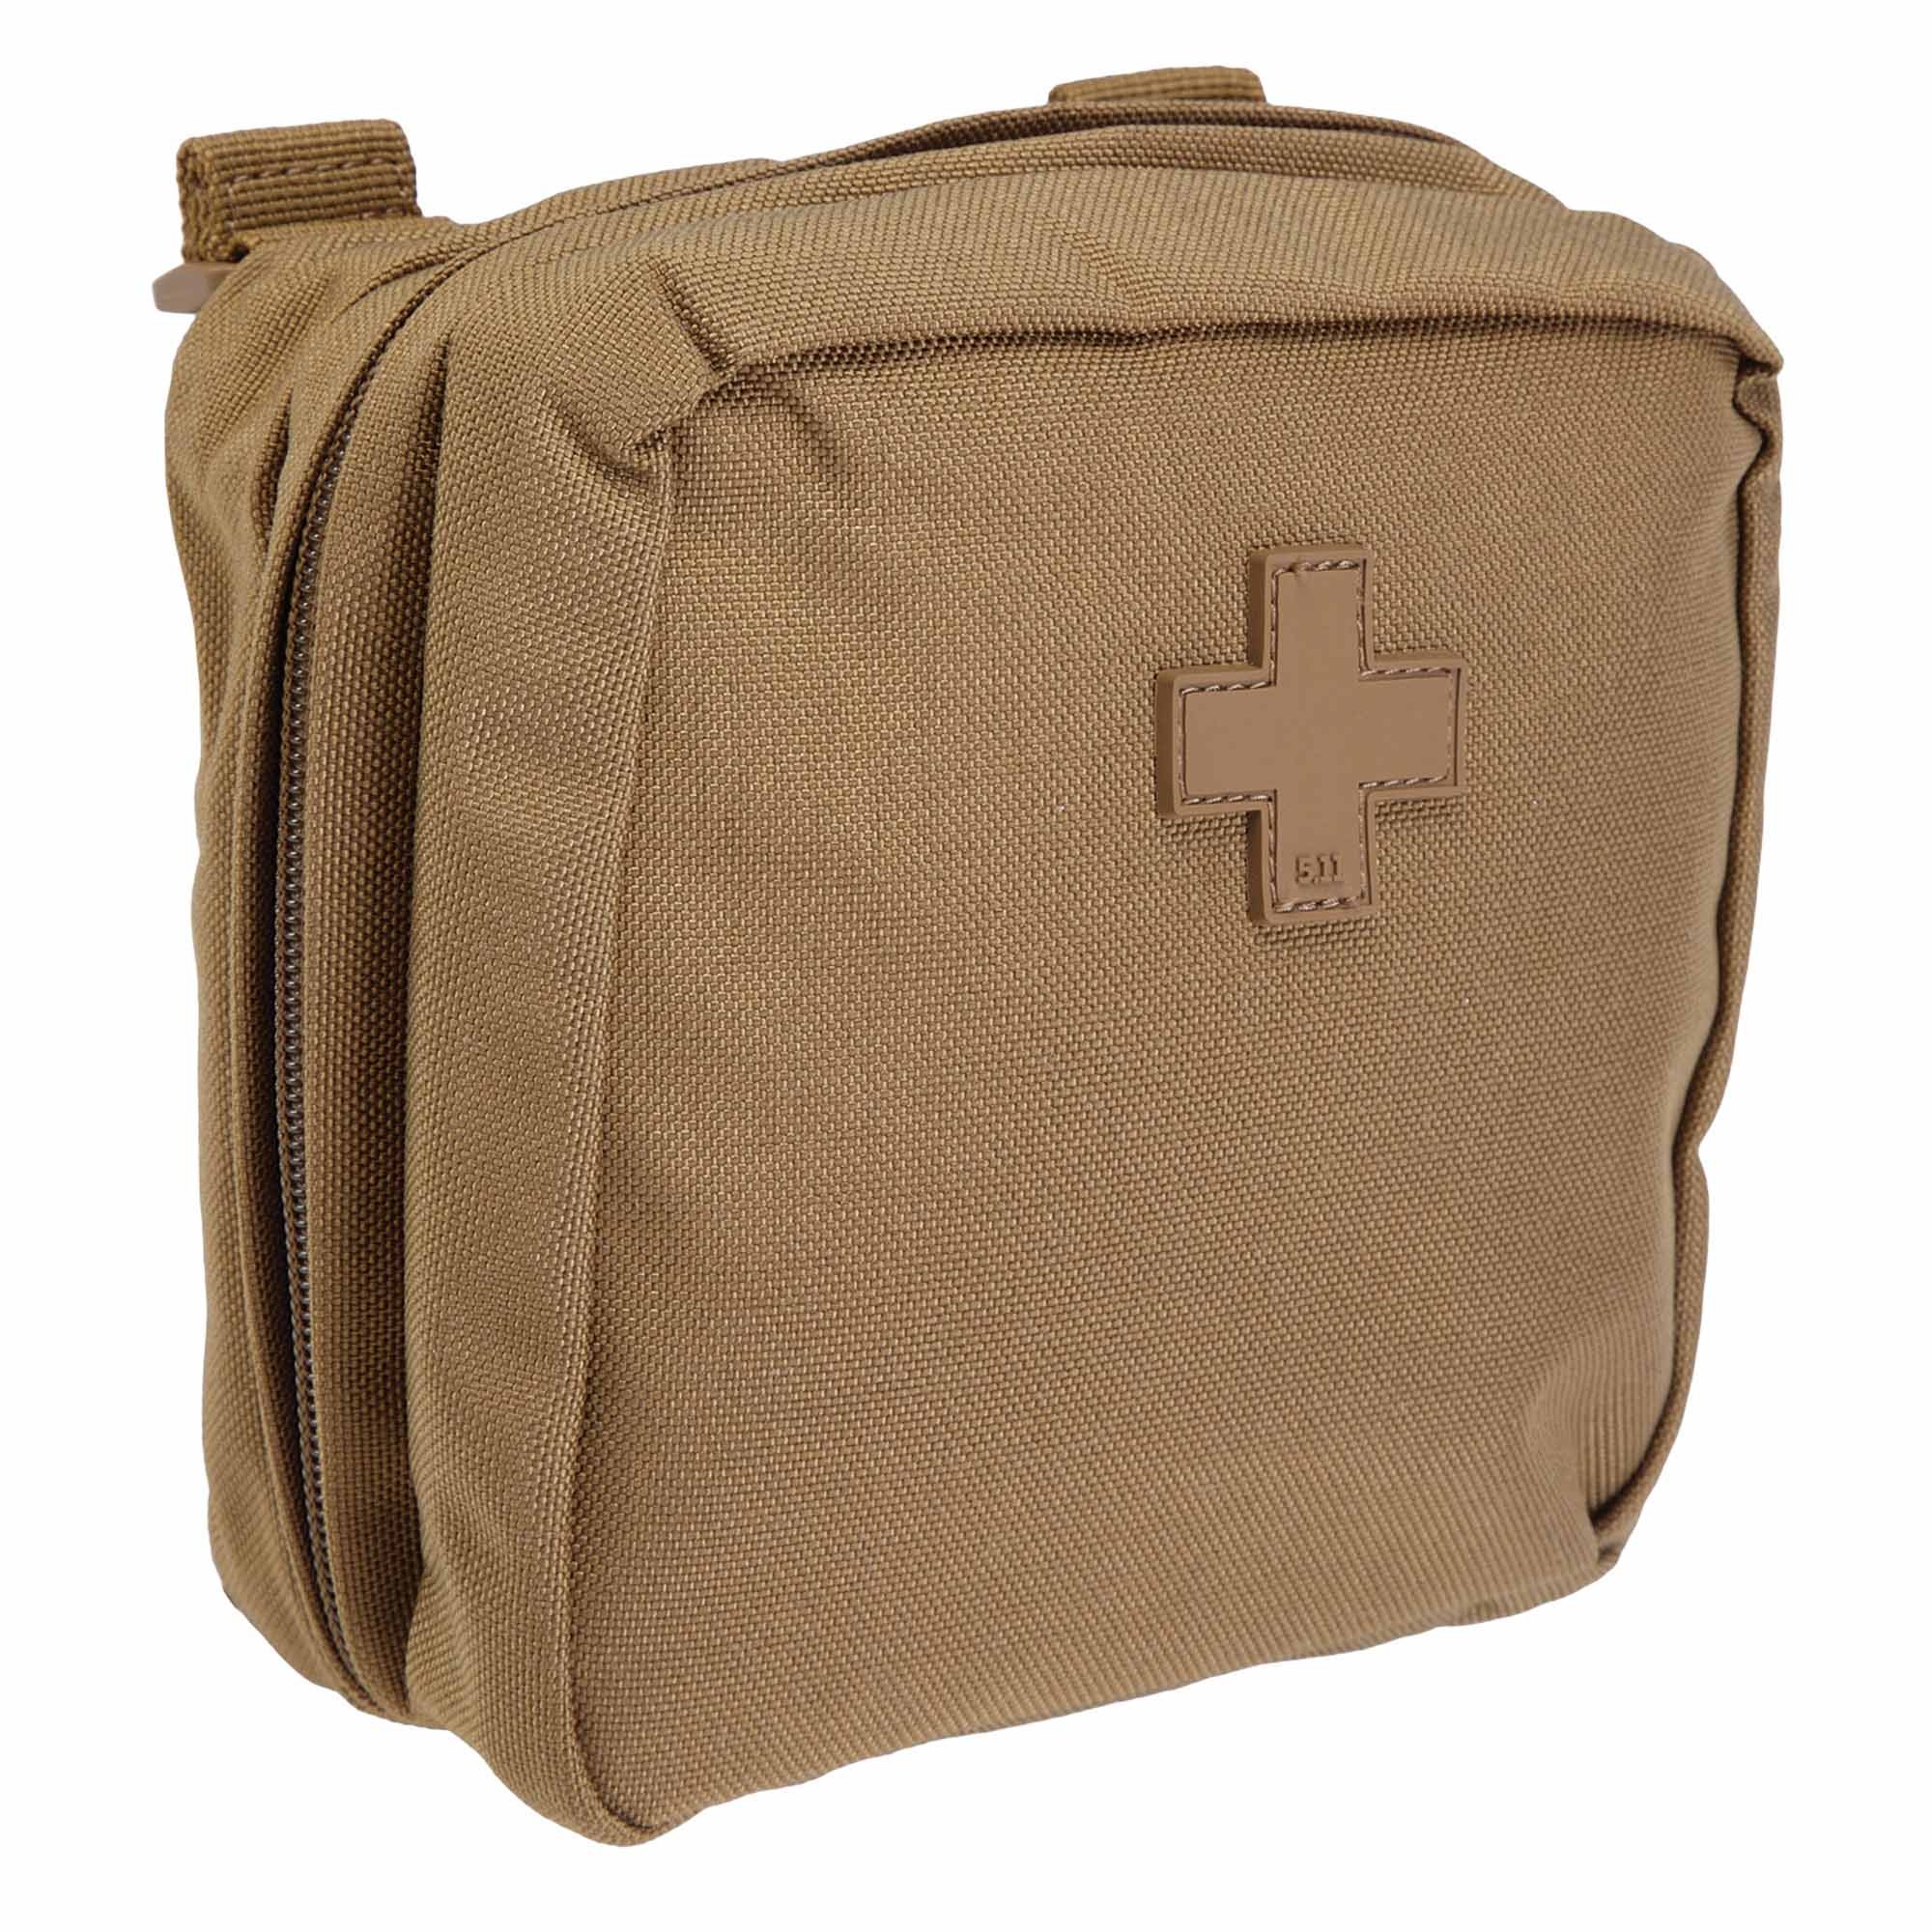 5.11 6x6 Med Pouch